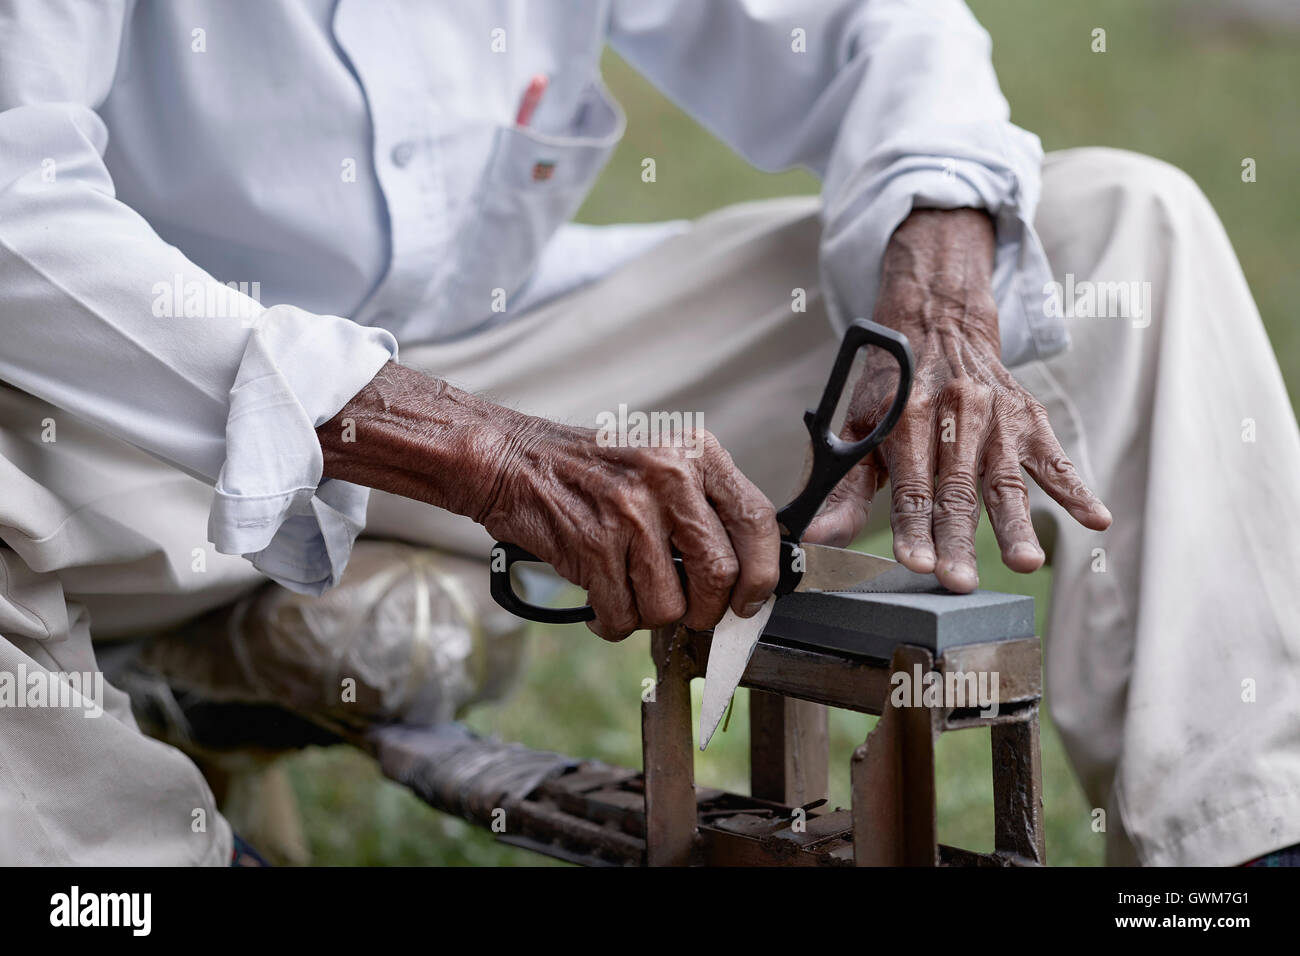 Knife grinder sharpening a pair of scissors. Hands of an elderly Asian man at work. Thailand Southeast Asia Stock Photo